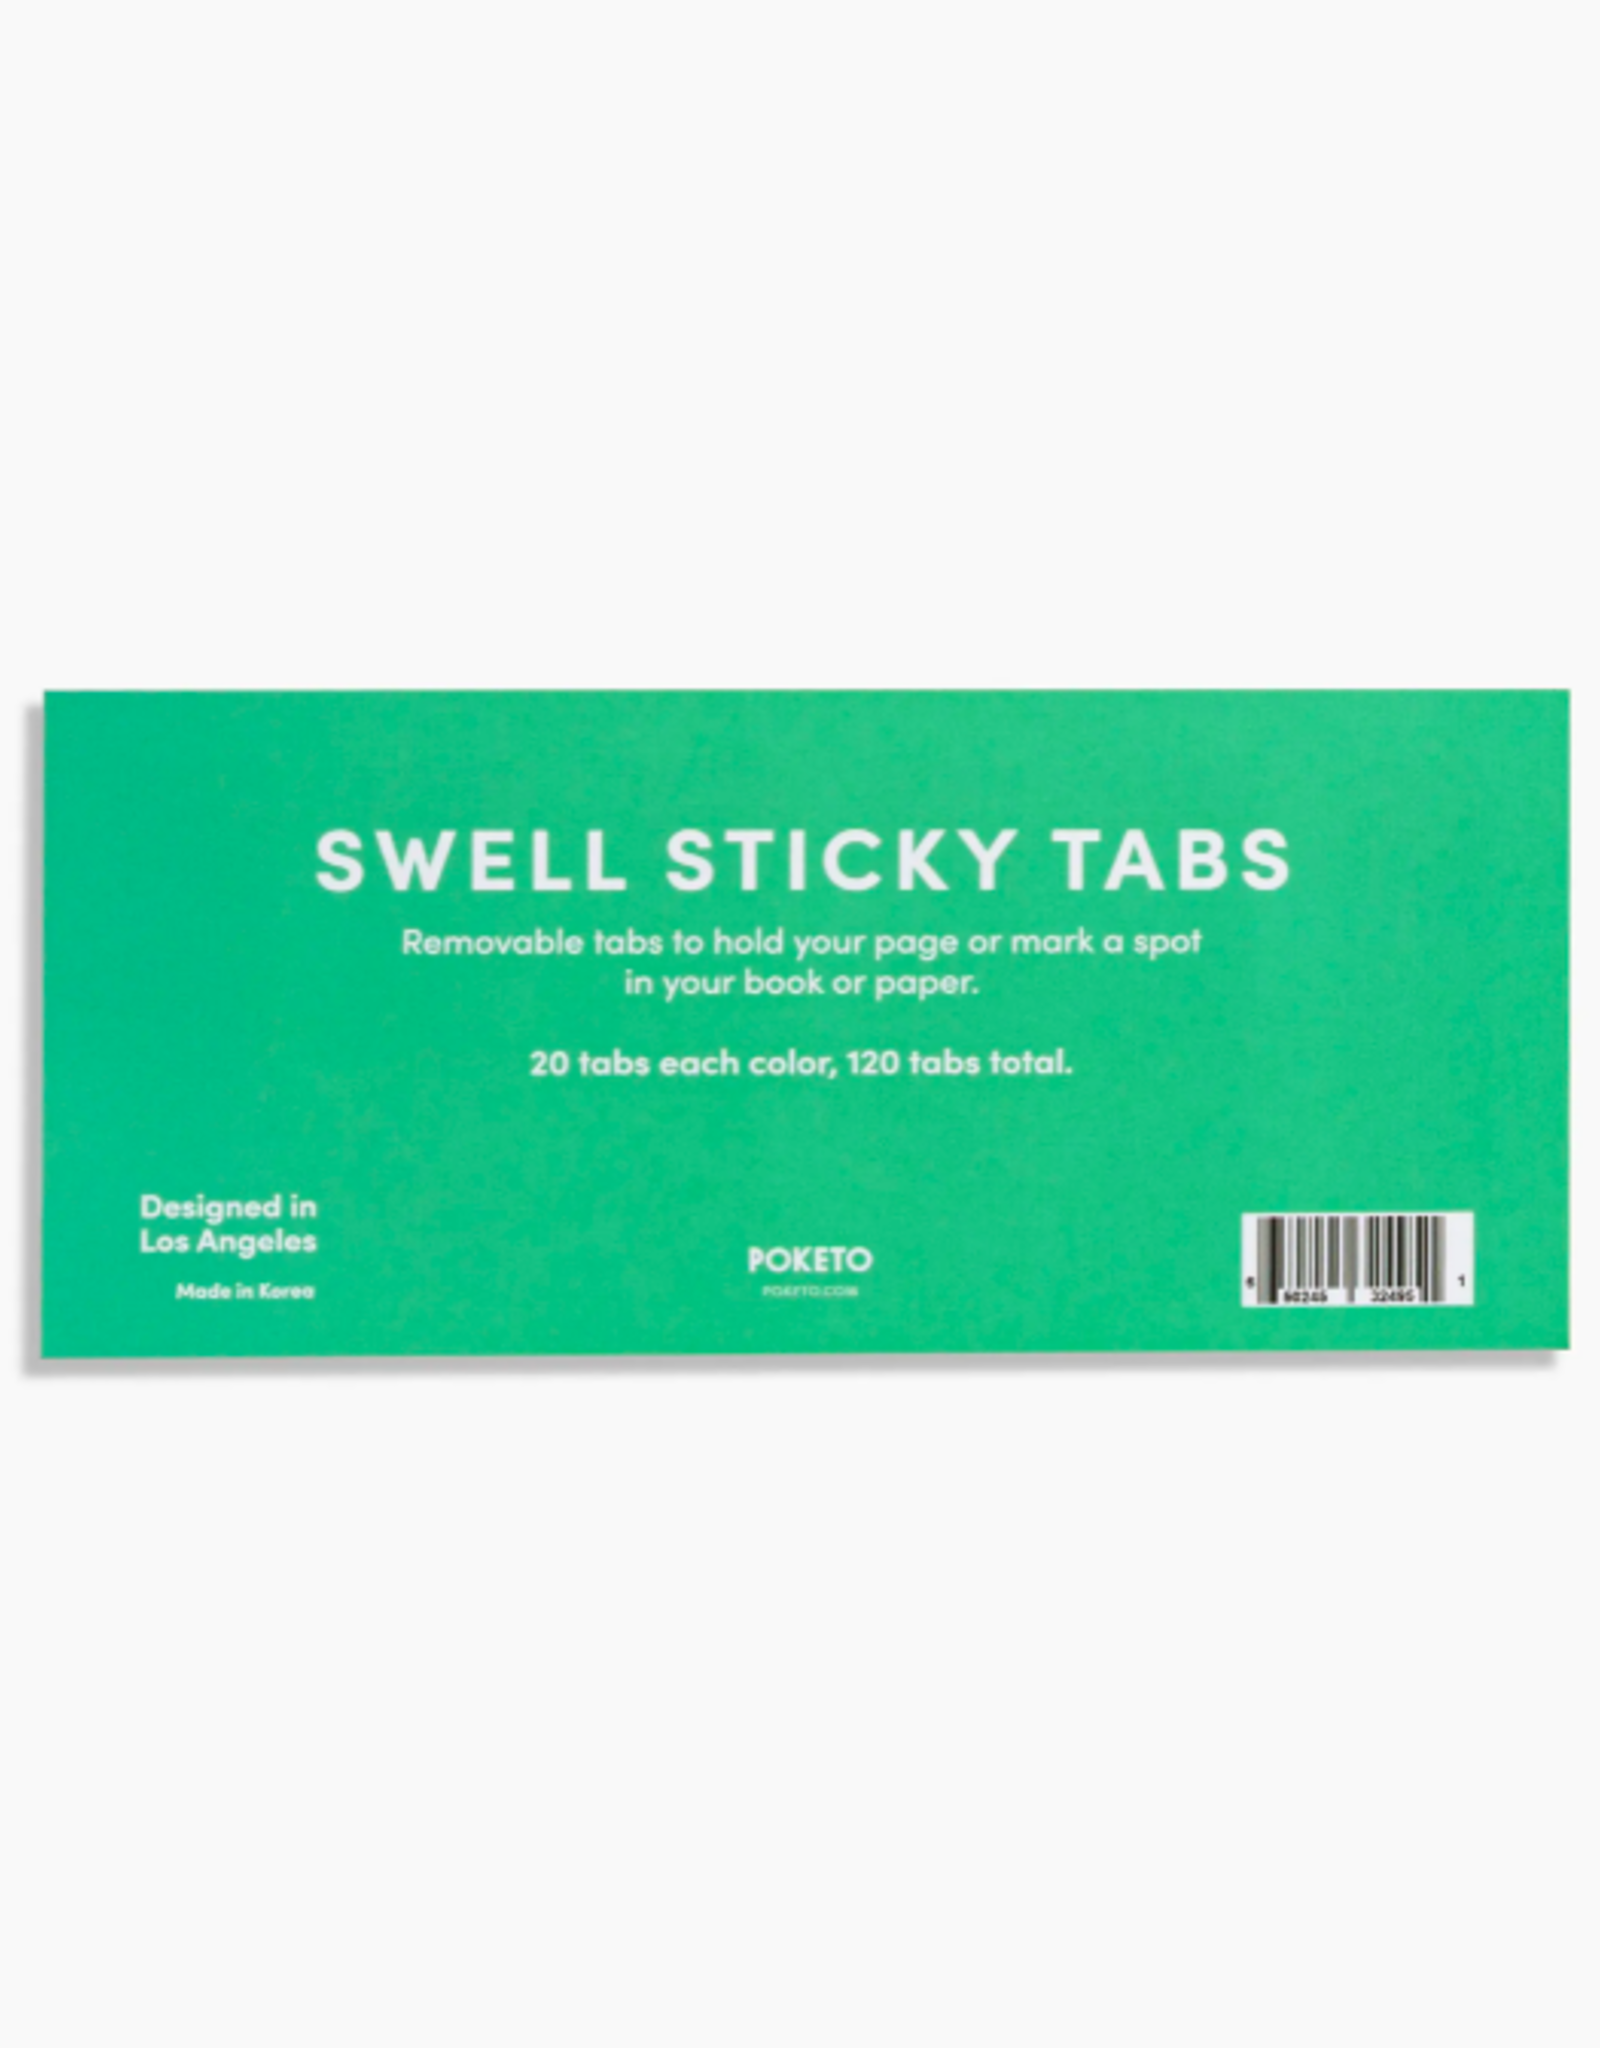 Swell Sticky Tabs